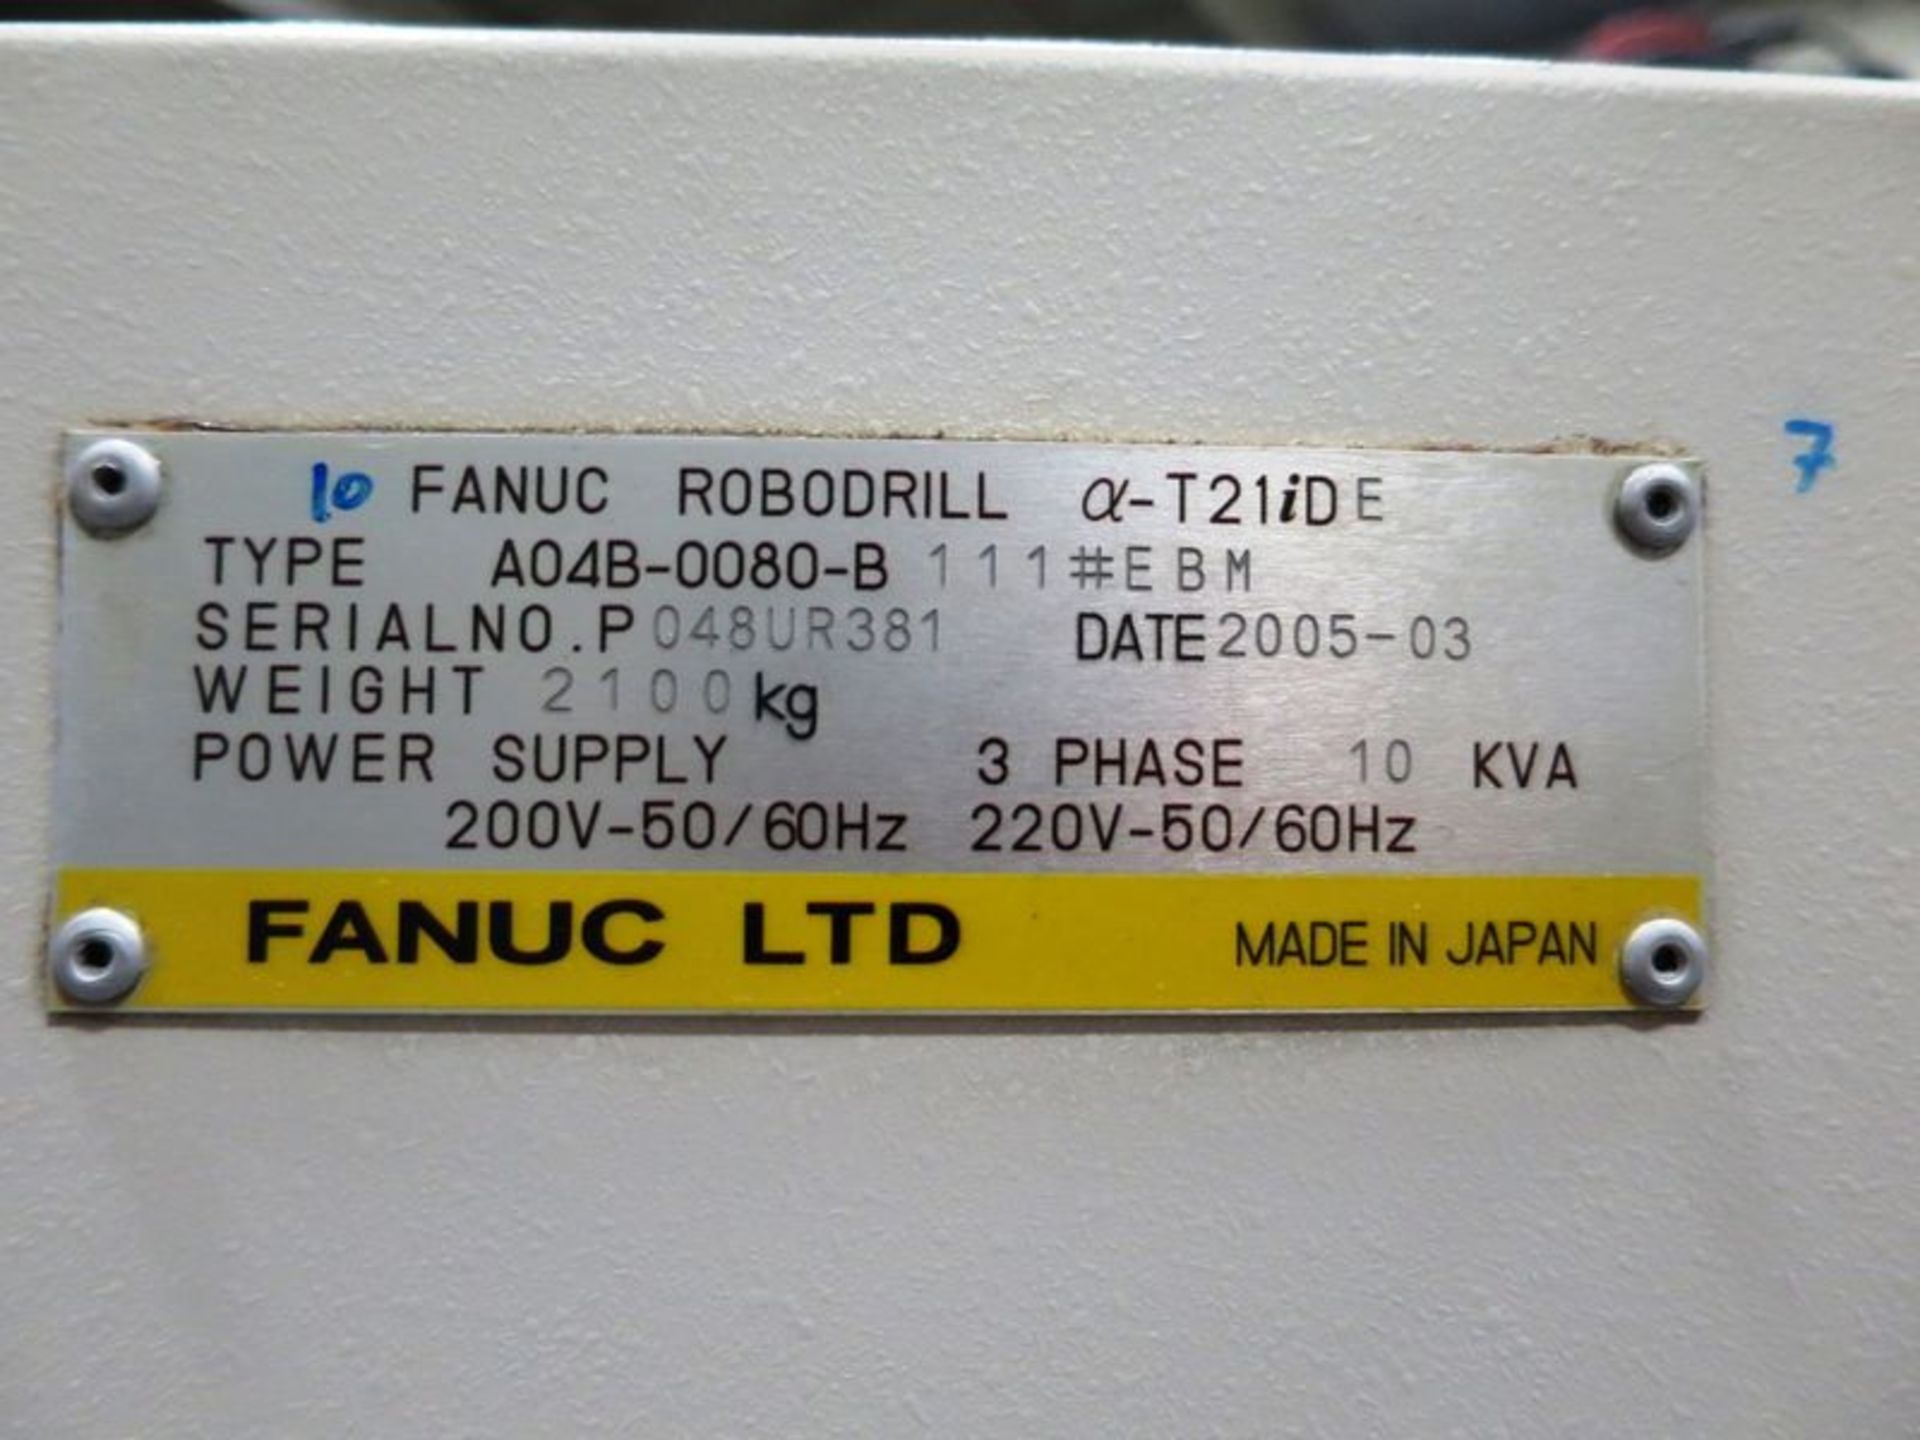 2005 Fanuc Robodrill Alpha T21iDE 3-Axis Vertical High Speed Drill Tap Center, S/N PO48UR381 - Image 10 of 12